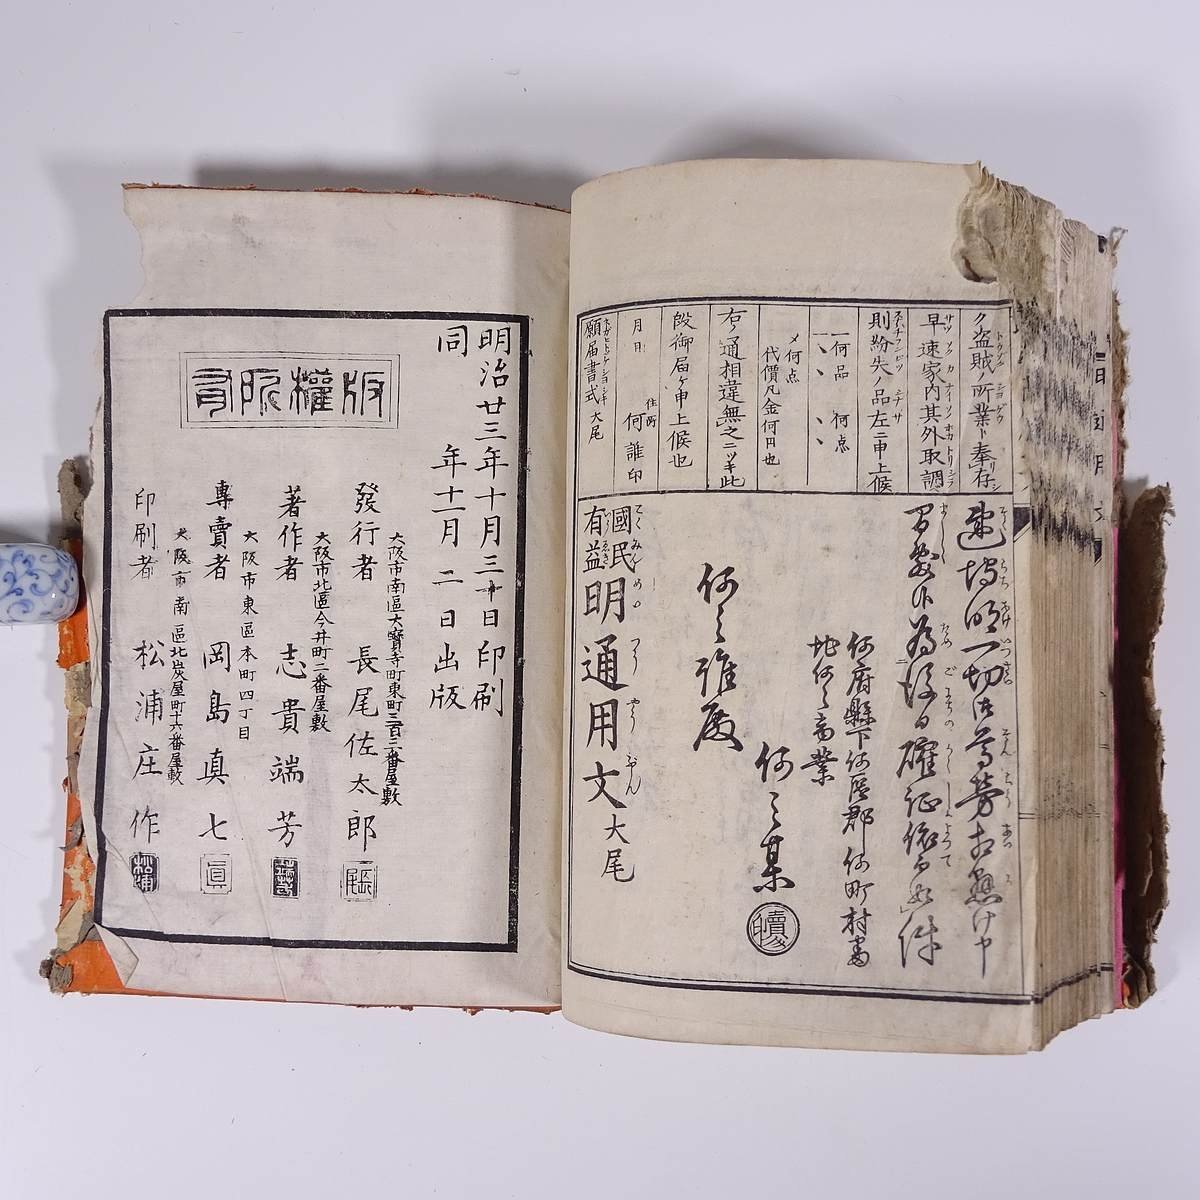 .. have . Akira circulation writing all .. edge . well-known peace against month paper length tail . Taro Meiji two three year 1890 old book peace .book@ letter article document calligraphy . character wool writing brush 